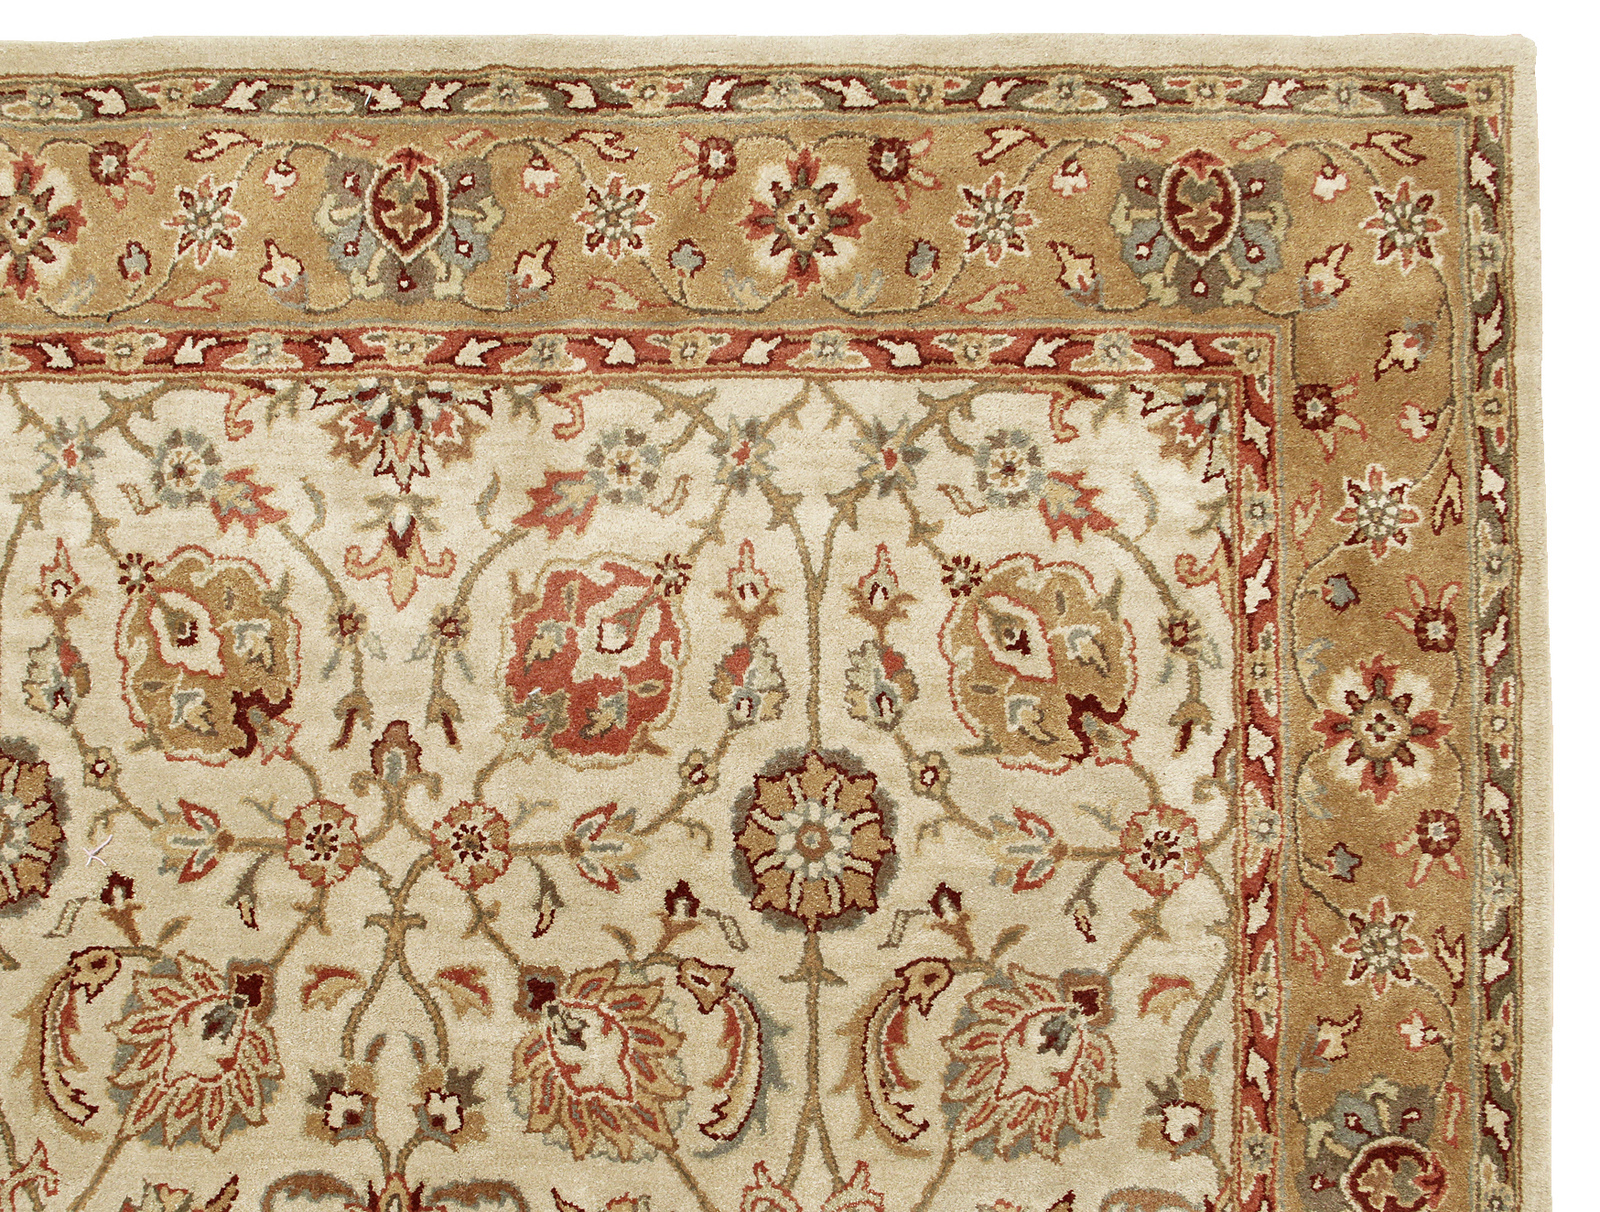 Primary image for Brand New Brant Brown Wool Persian Style Area Rug - 5' x 8'